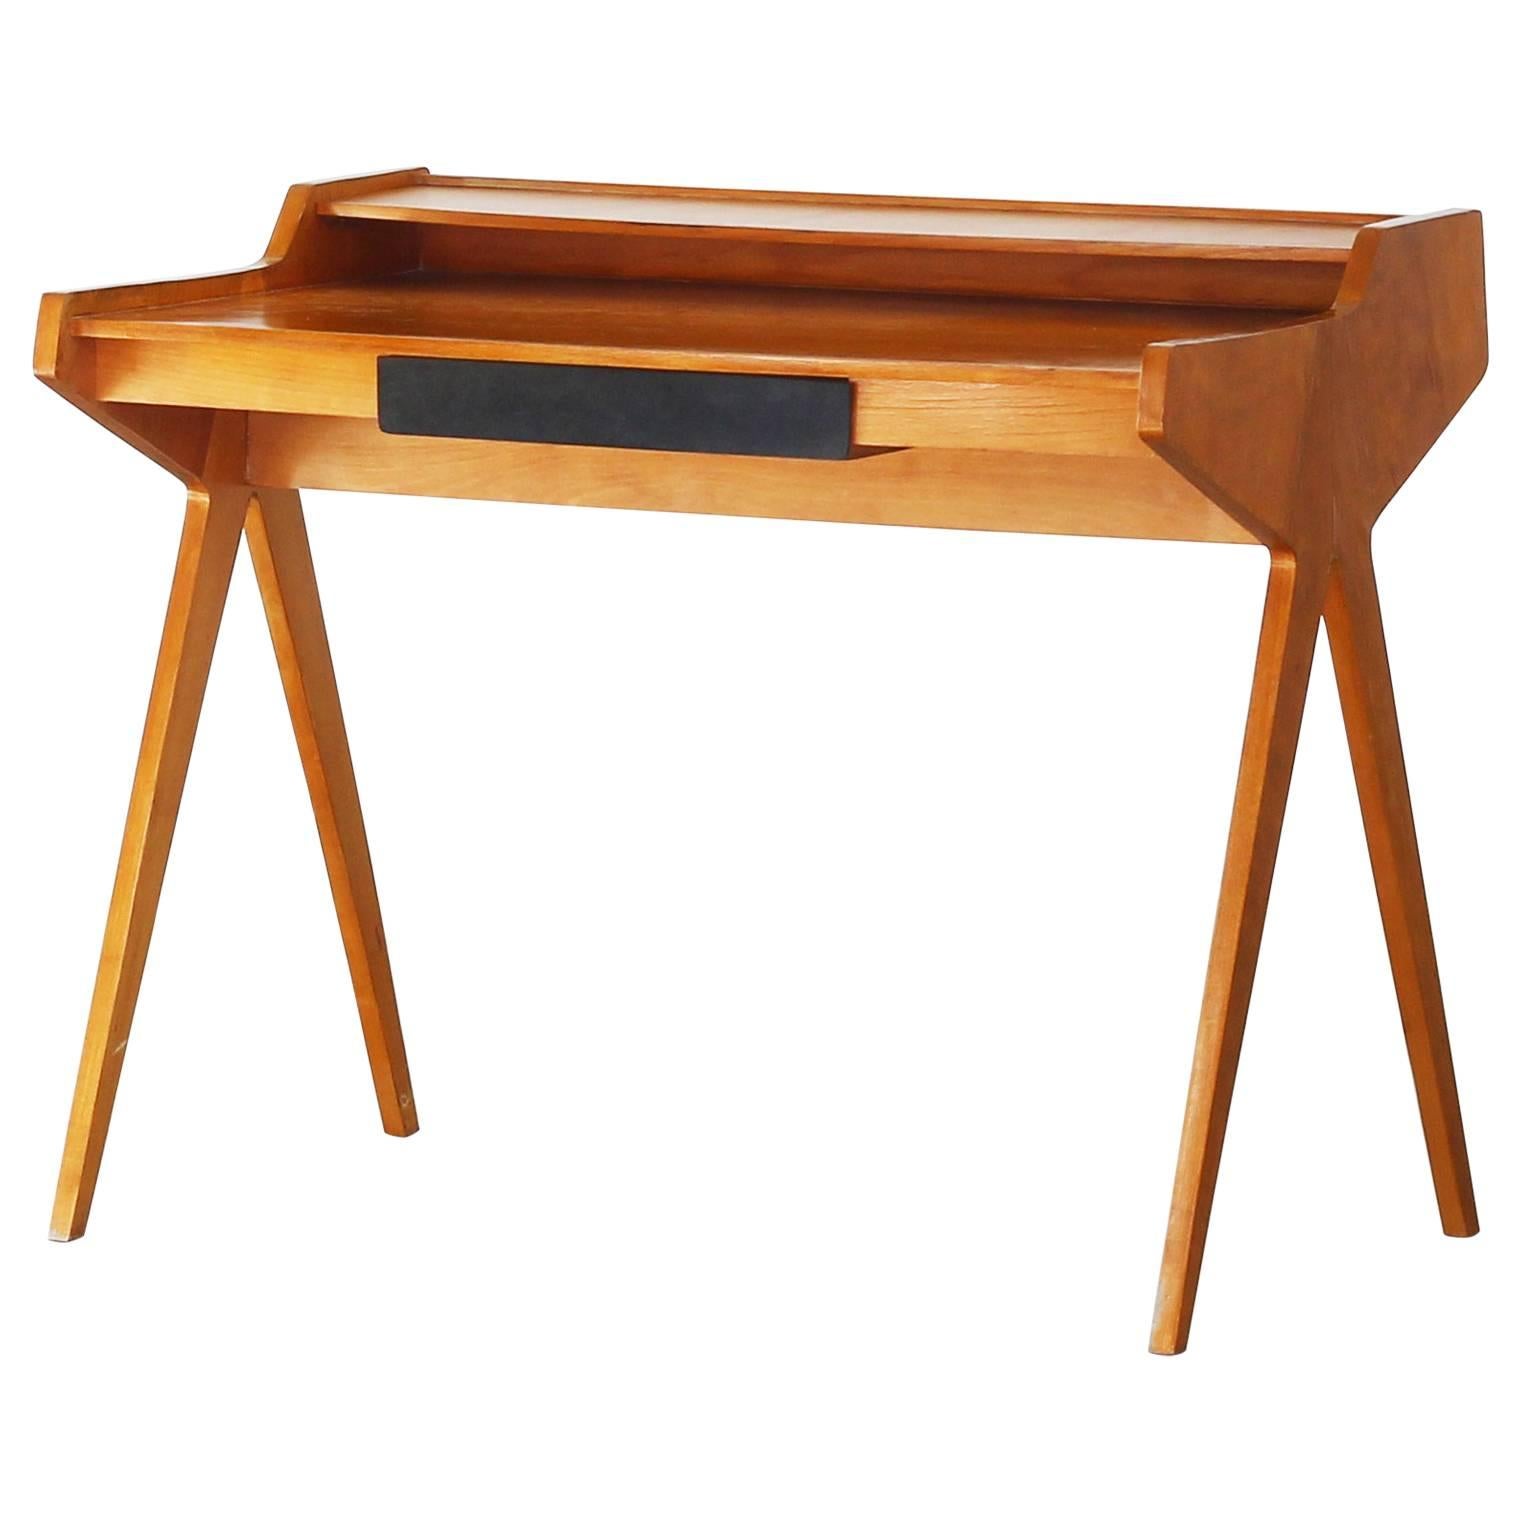 Beautiful Desk Writing Table by Helmut Magg for WK Möbel Germany, 1955